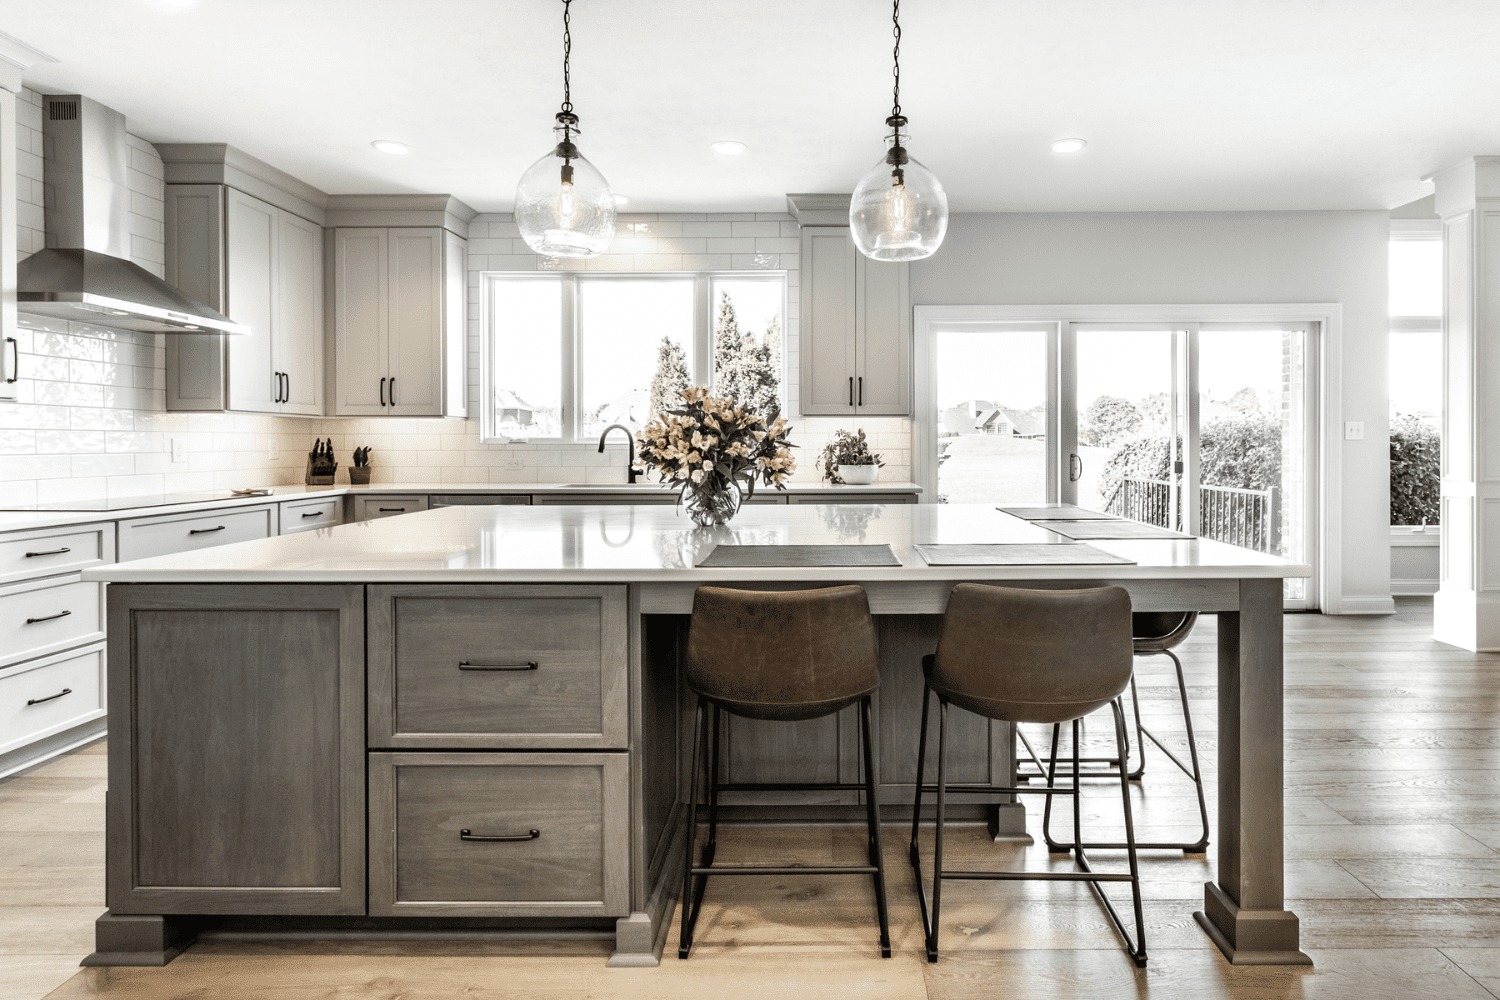 Nicholas Design Build | A kitchen with a center island and stools.